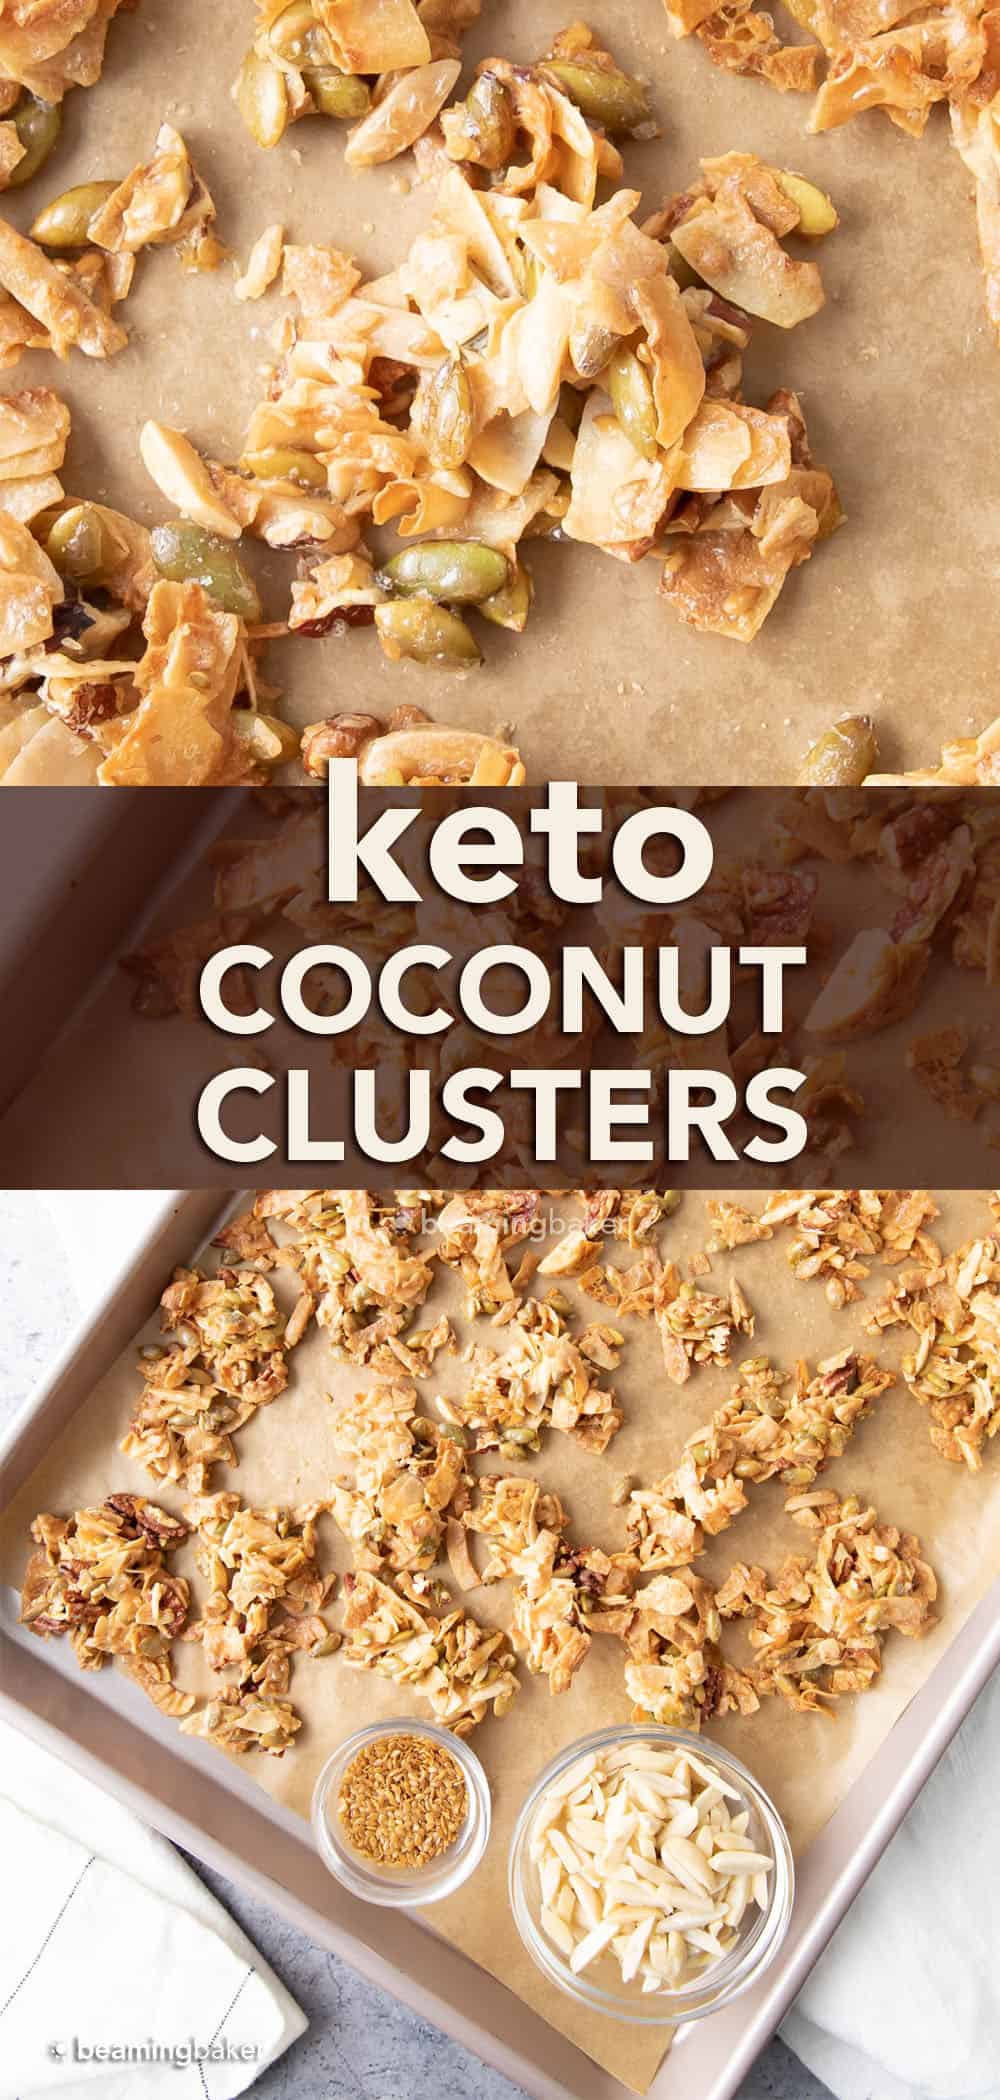 Keto Coconut Clusters pin image